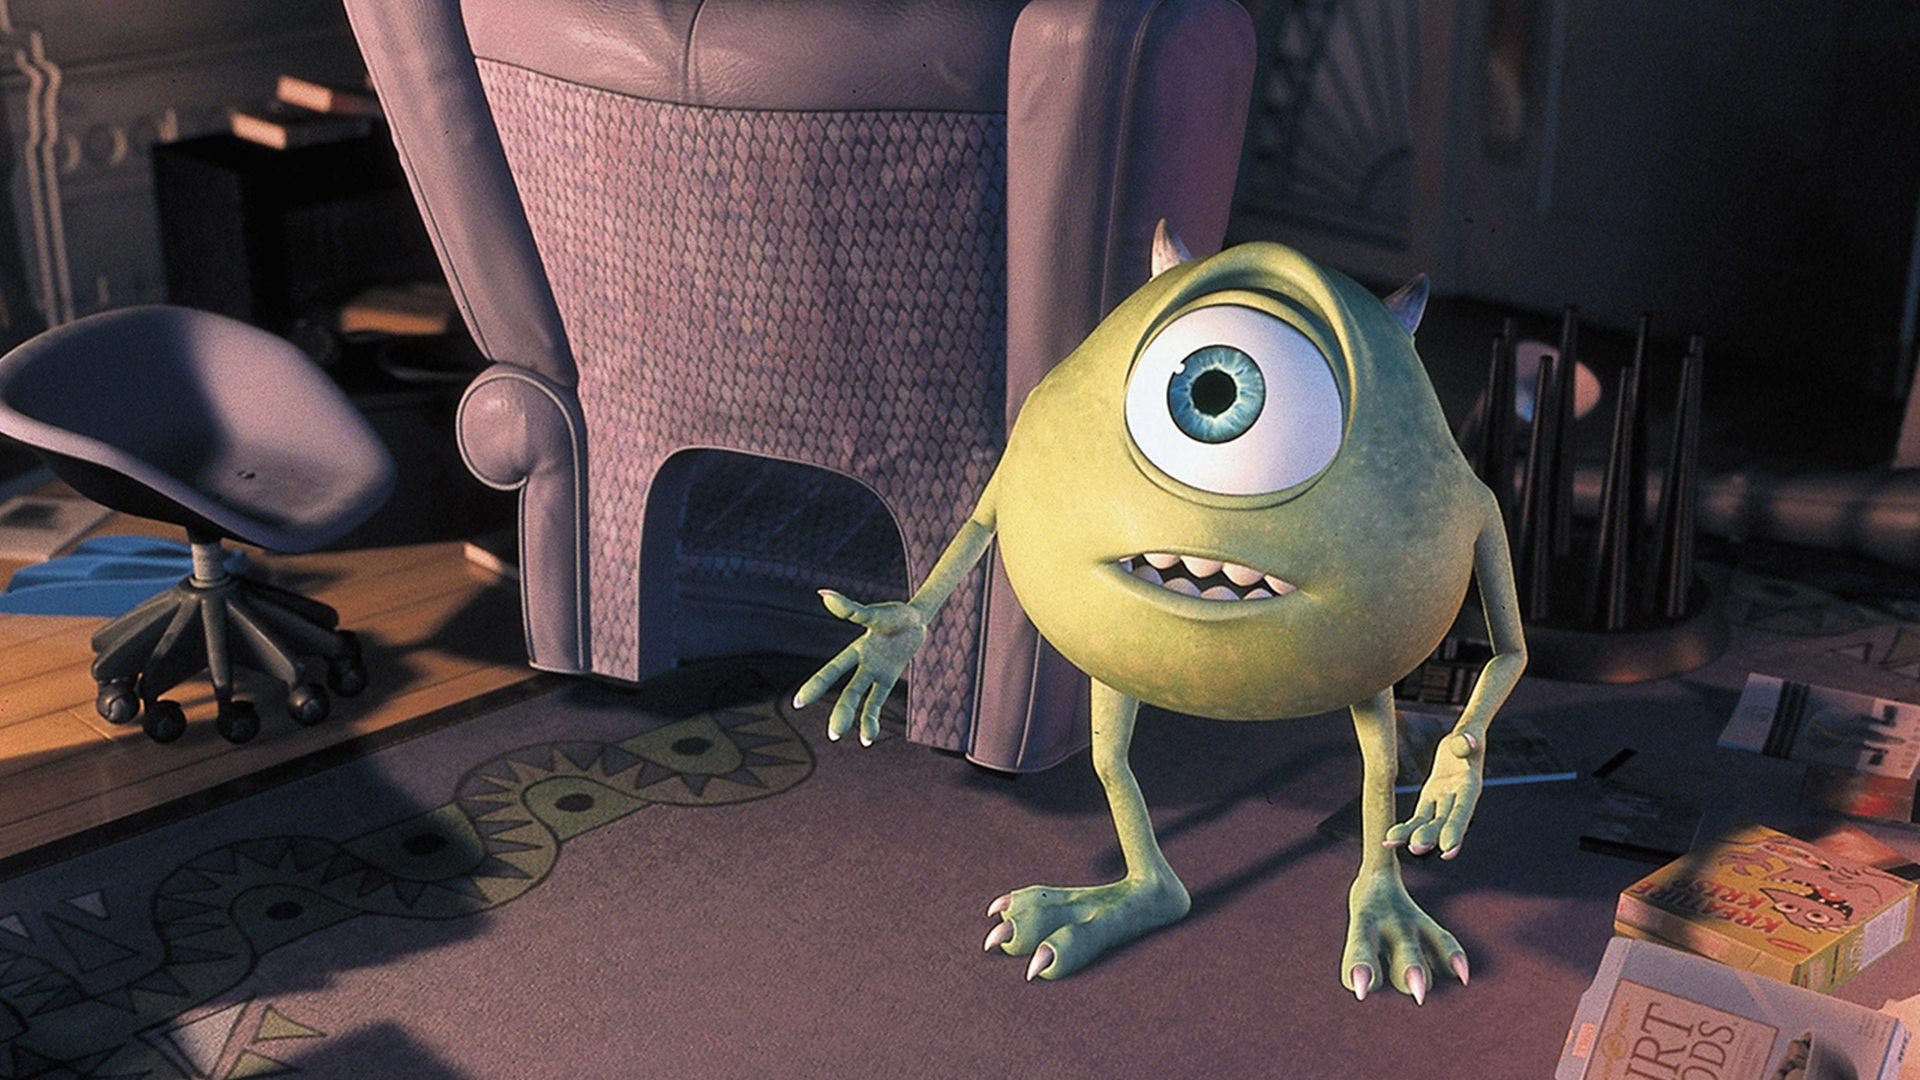 Mike Wazowski from Monsters Inc.